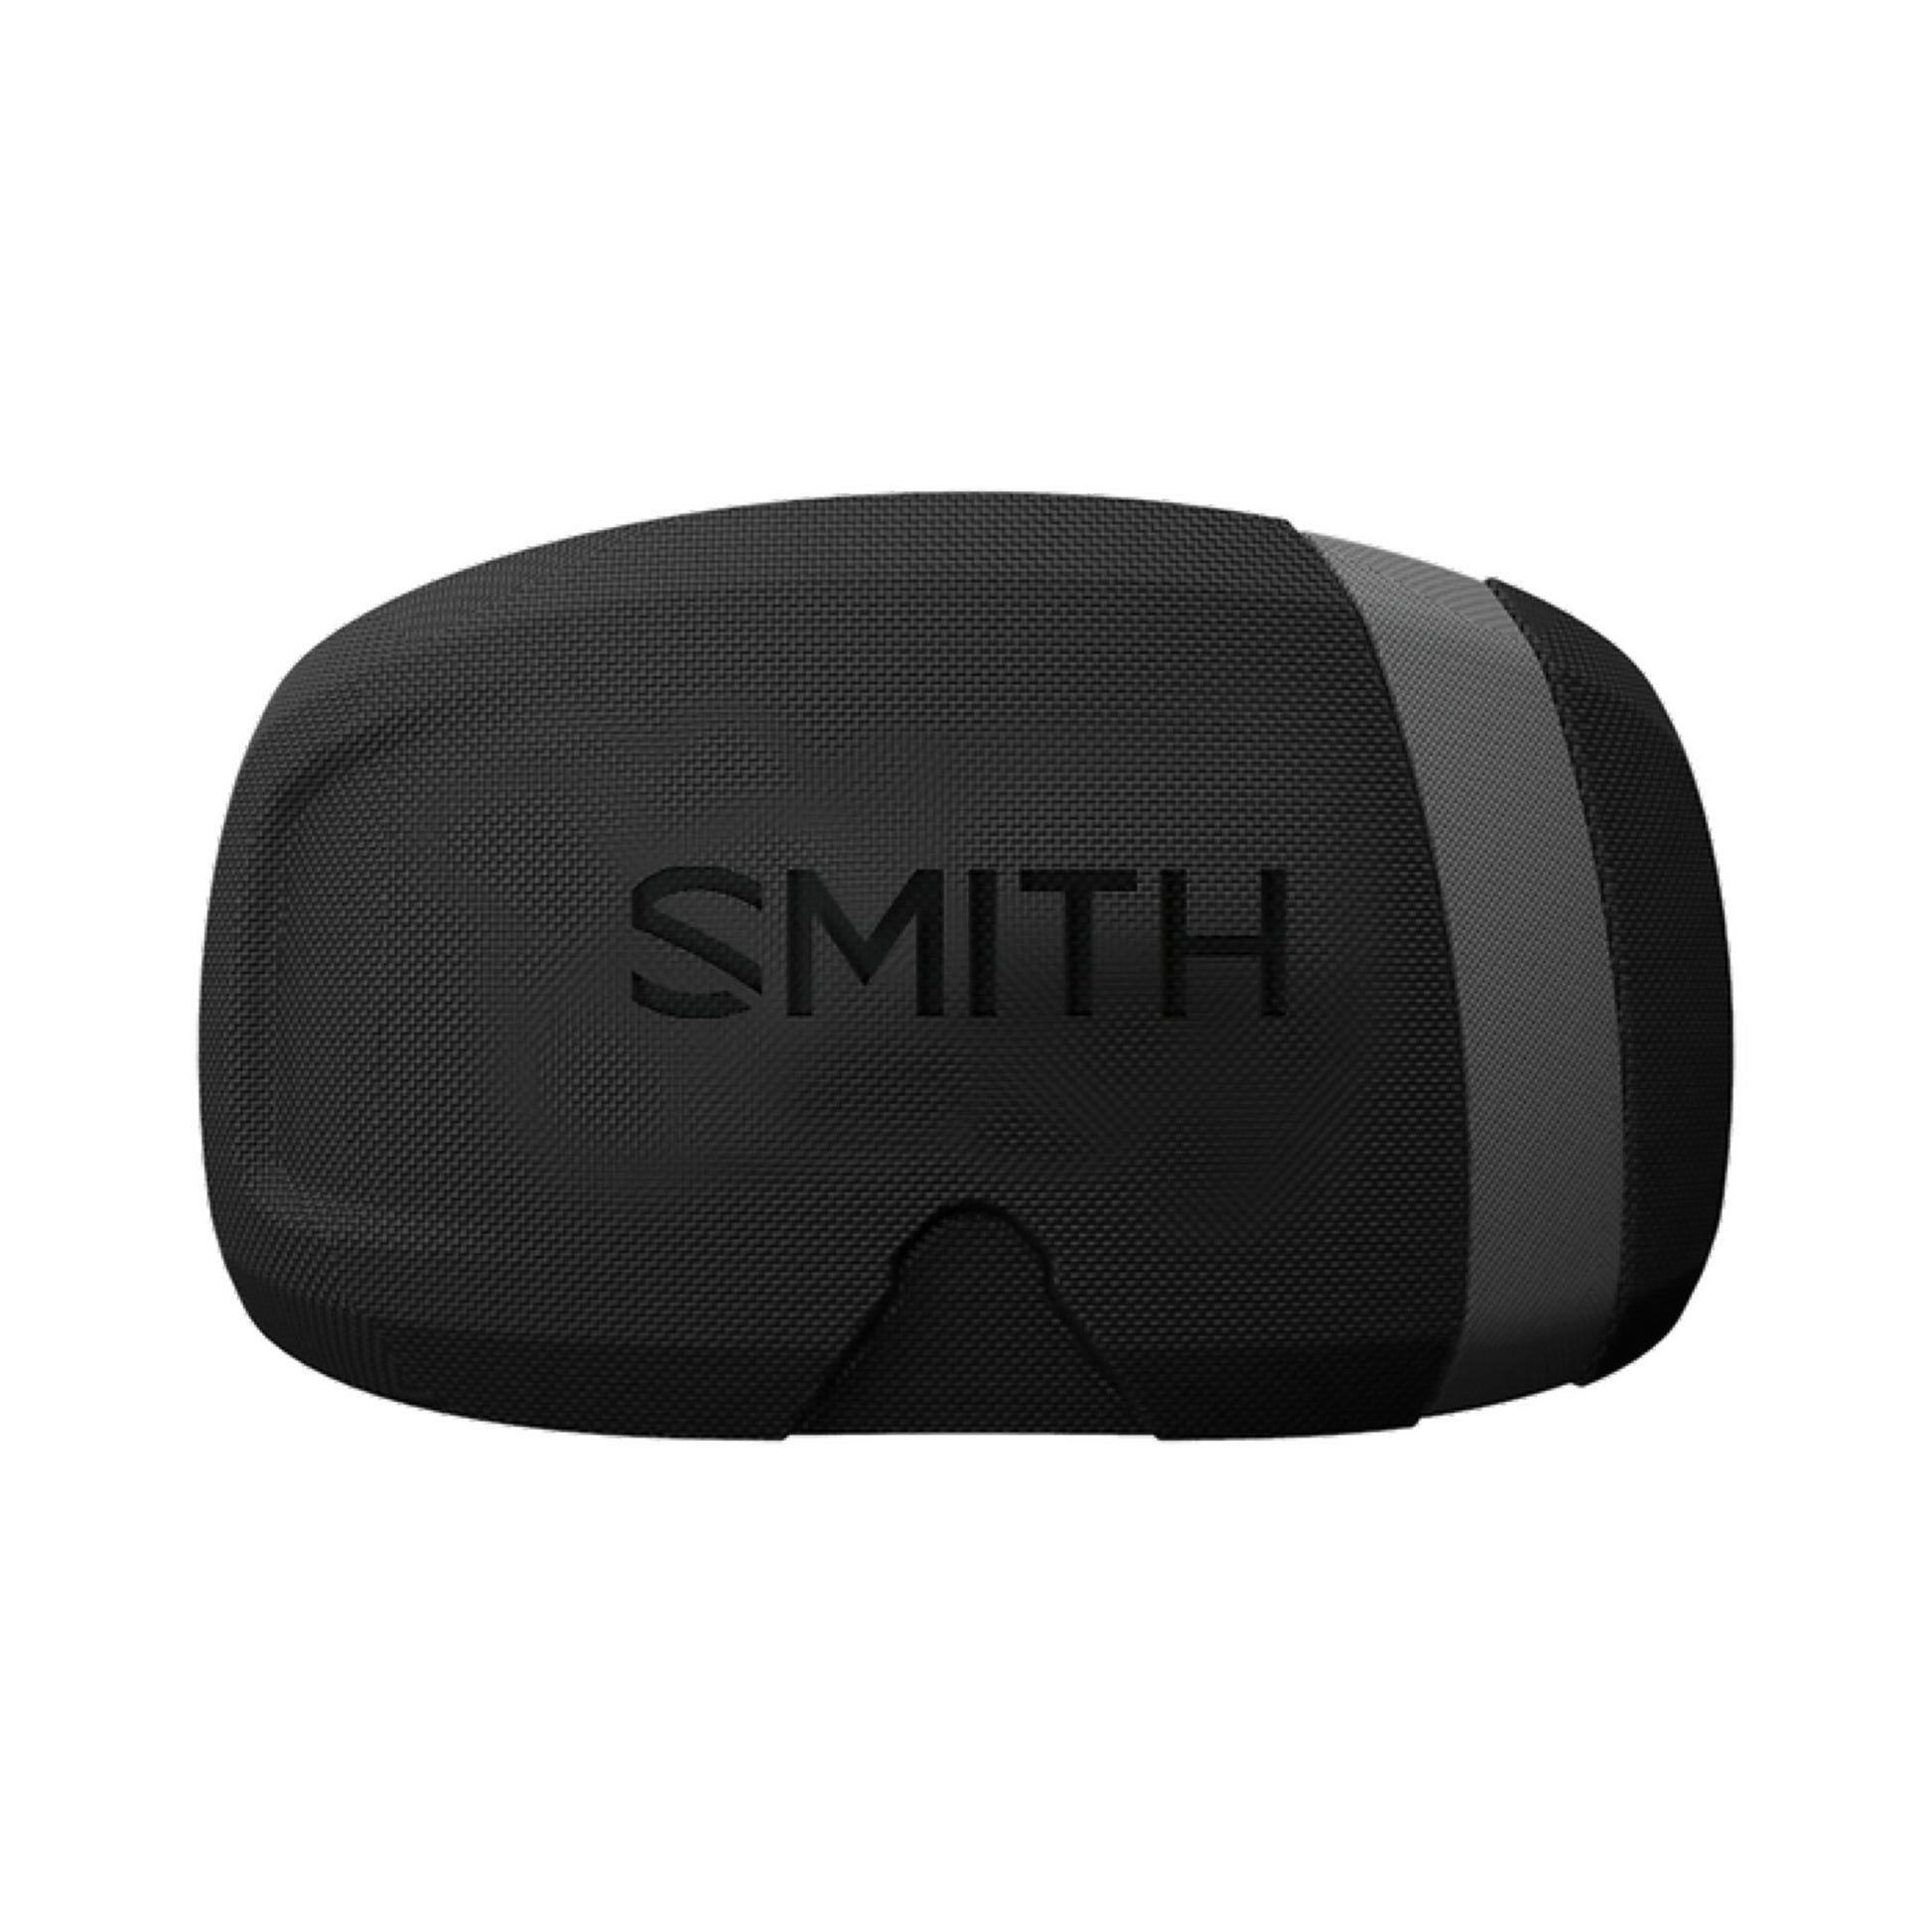 Smith Molded Goggle Lens Case Black OS Accessory Bags